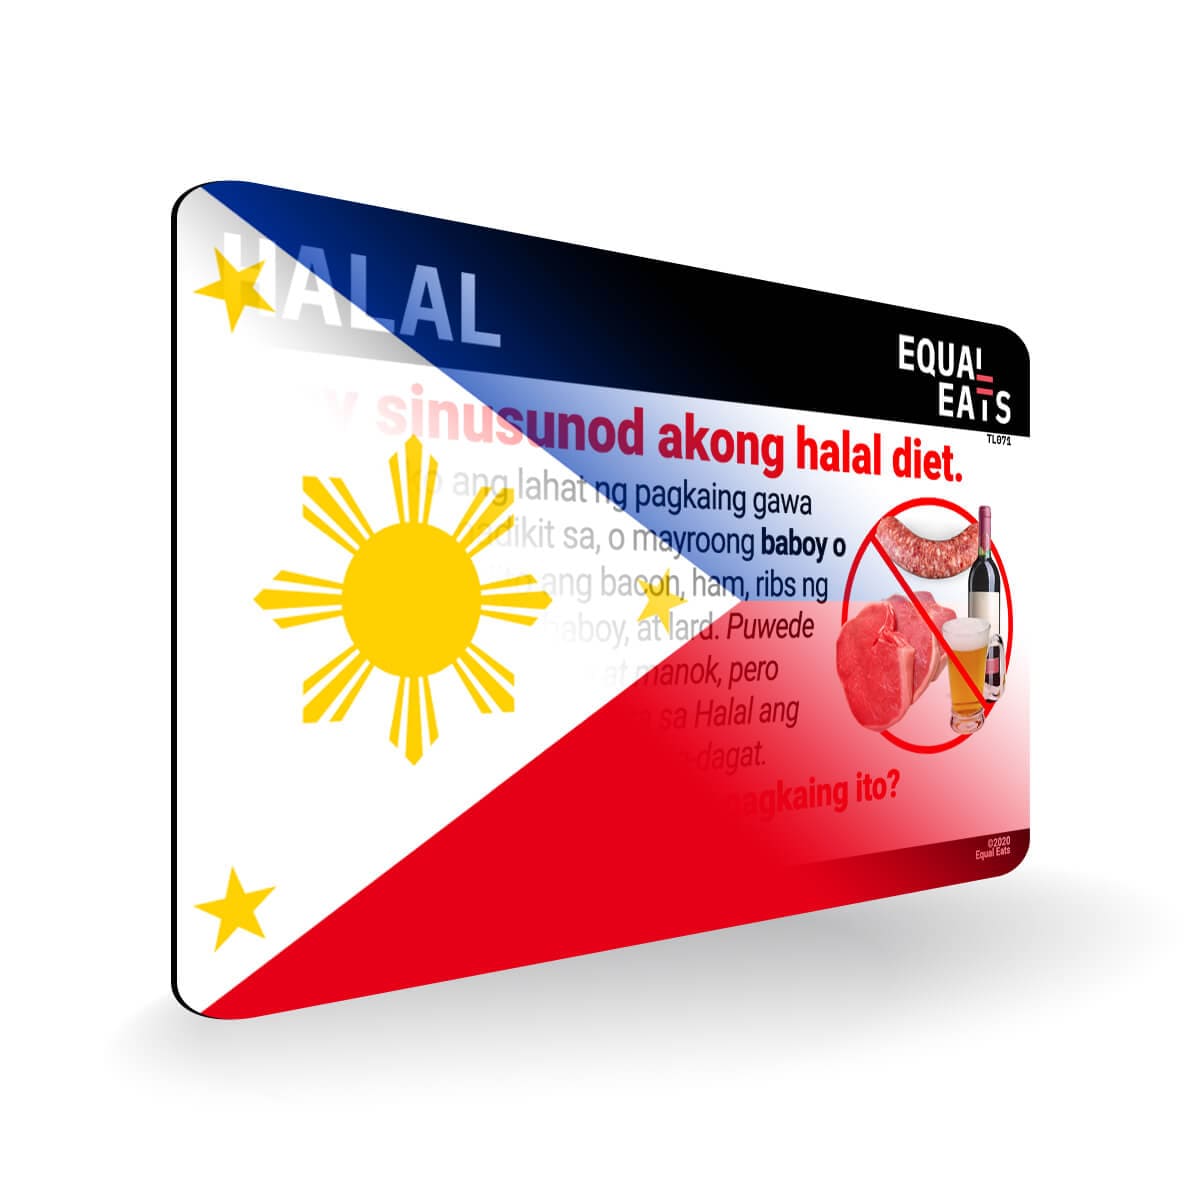 Halal Diet in Tagalog. Halal Food Card for Philippines